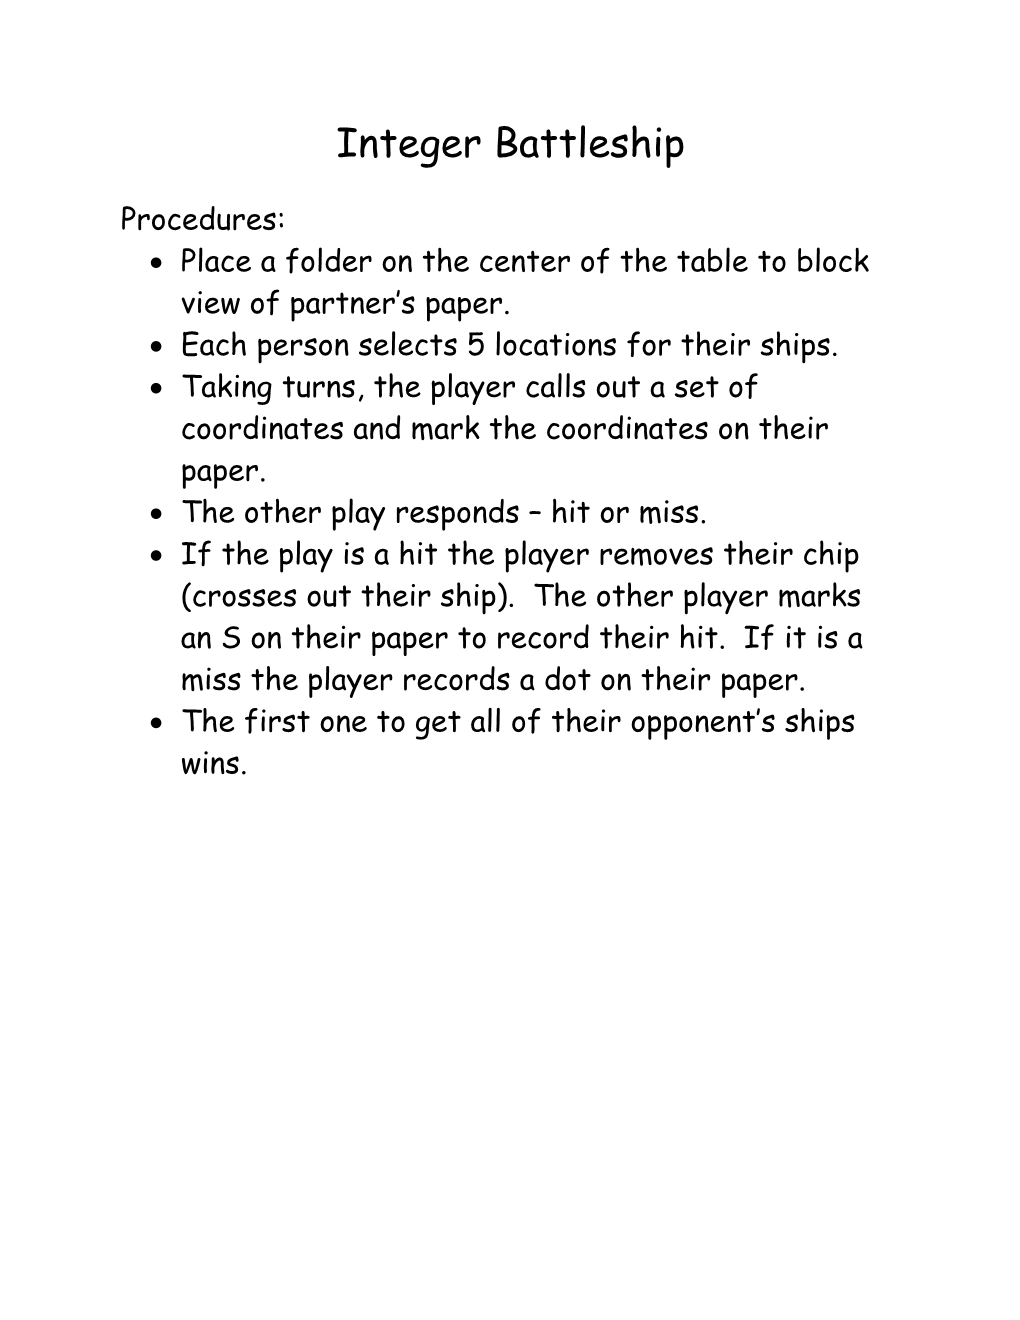 Place a Folder on the Center of the Table to Block View of Partner S Paper